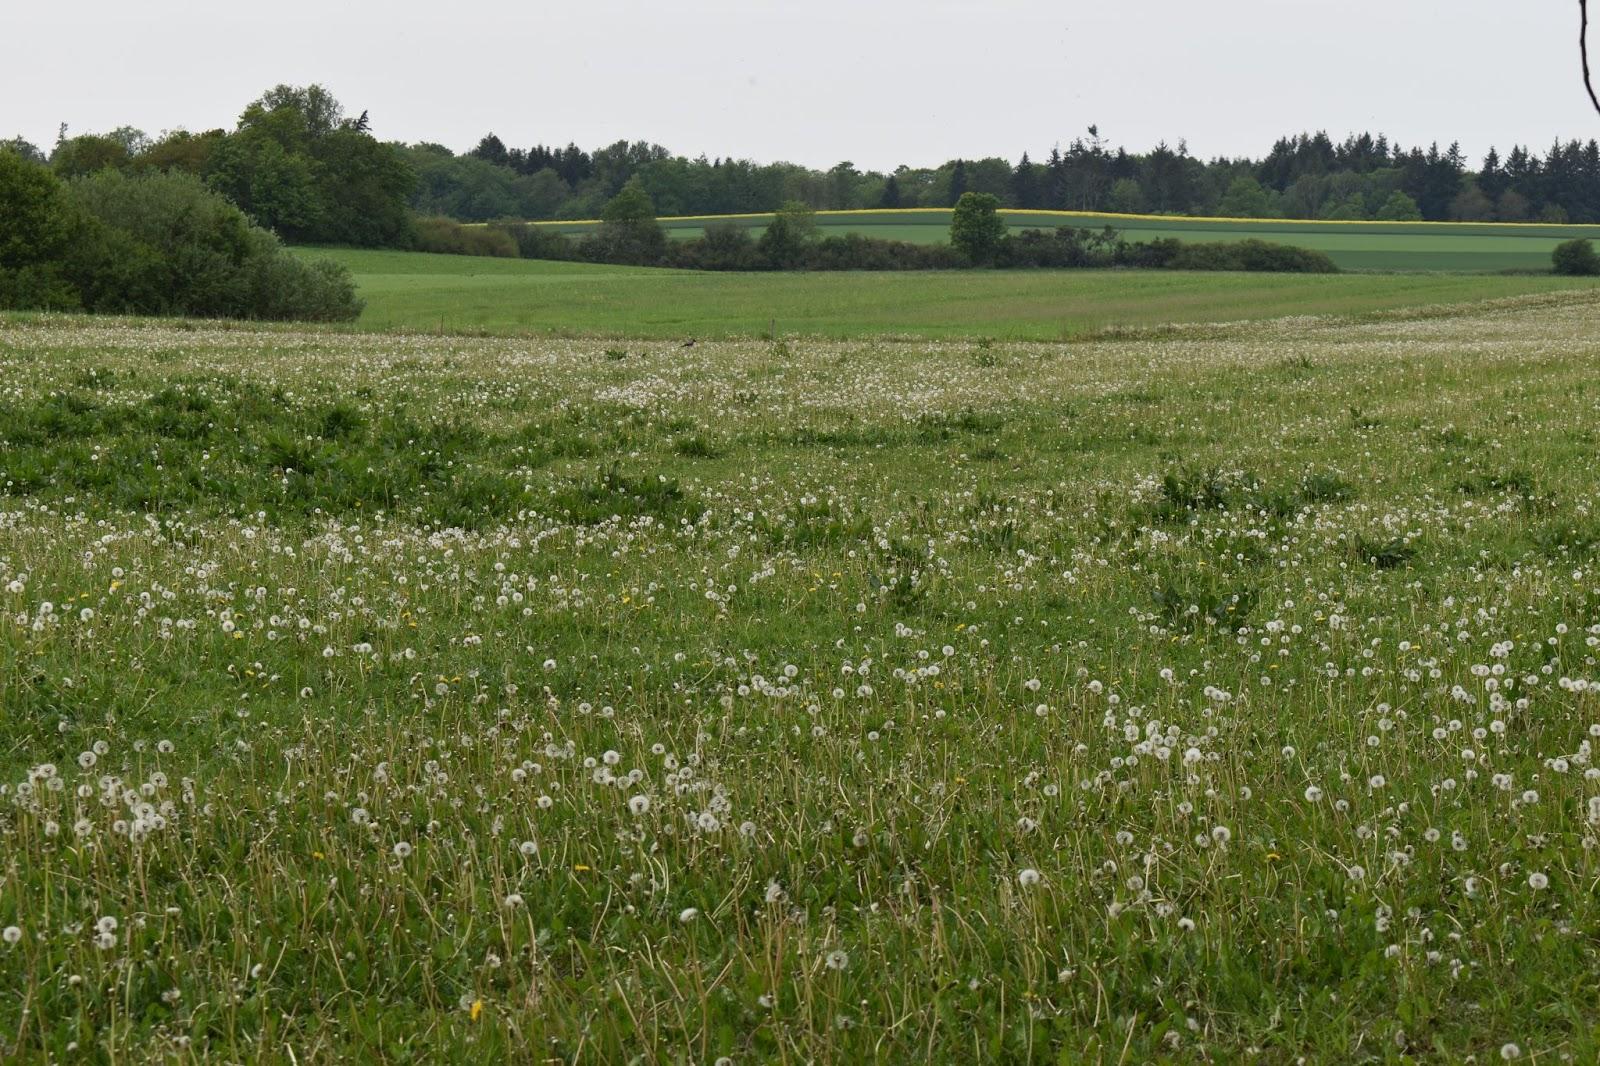 Hallingelille is surrounded by seemingly endless grassy fields dotted with white dandelion flowers.